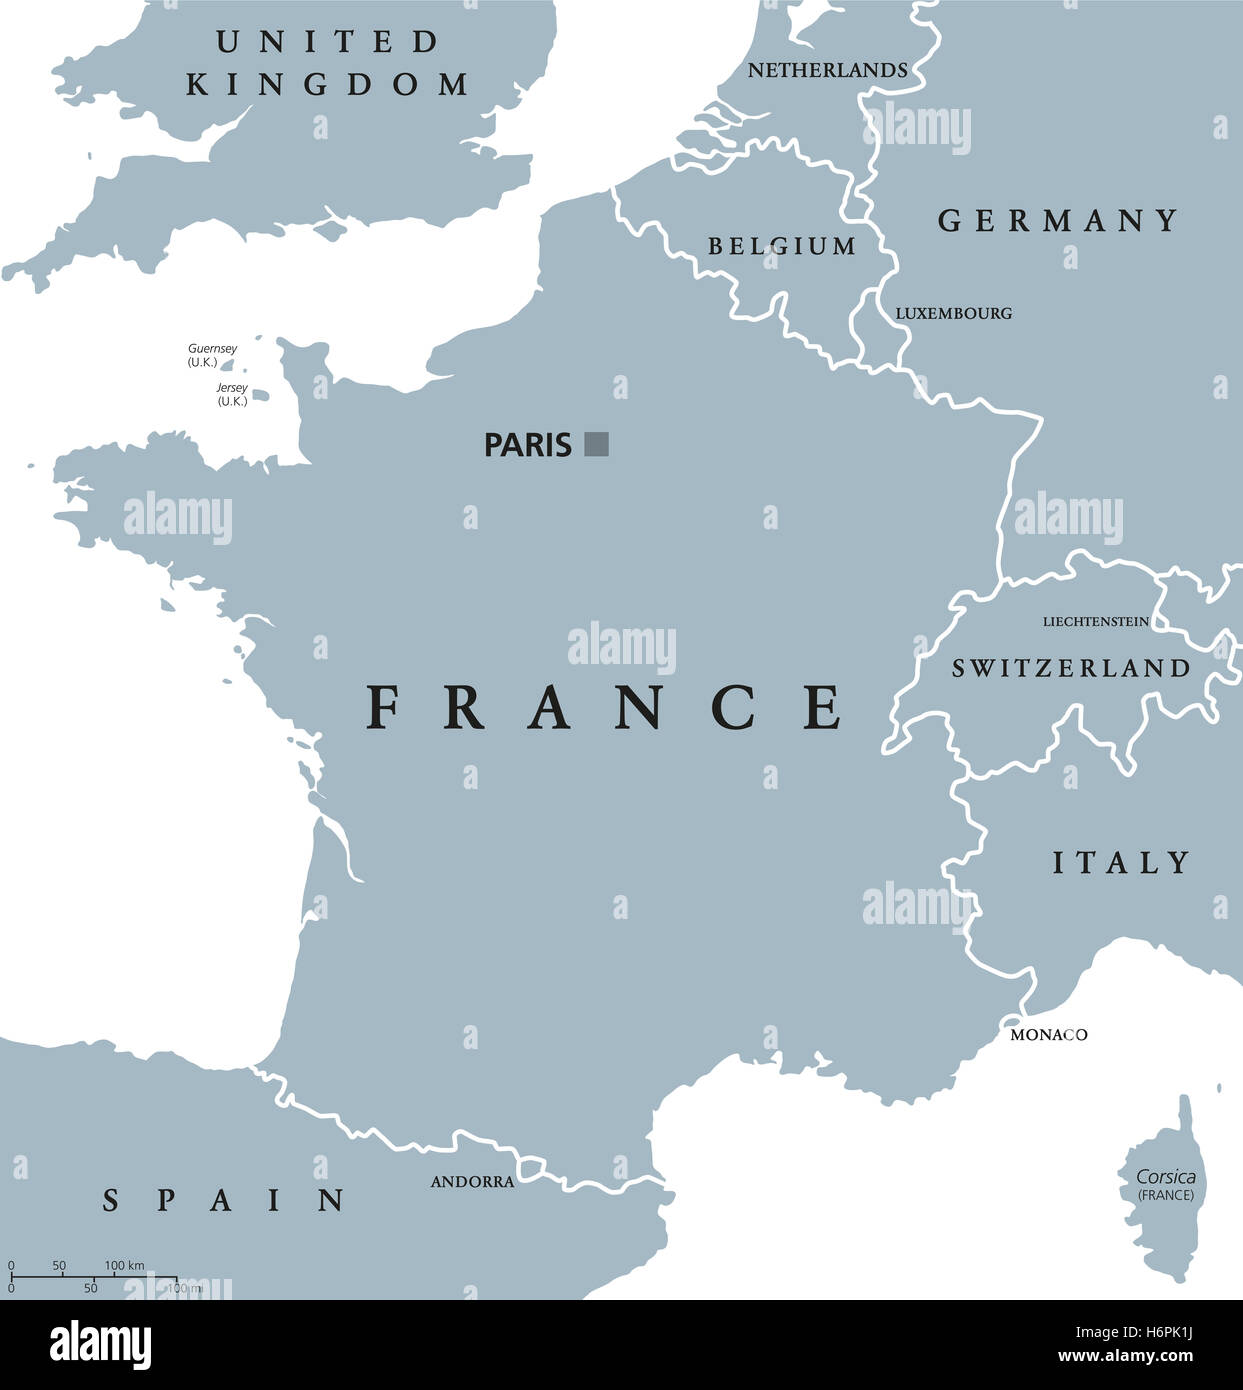 France political map with capital Paris, Corsica, national borders and neighbor countries. Gray illustration. Stock Photo